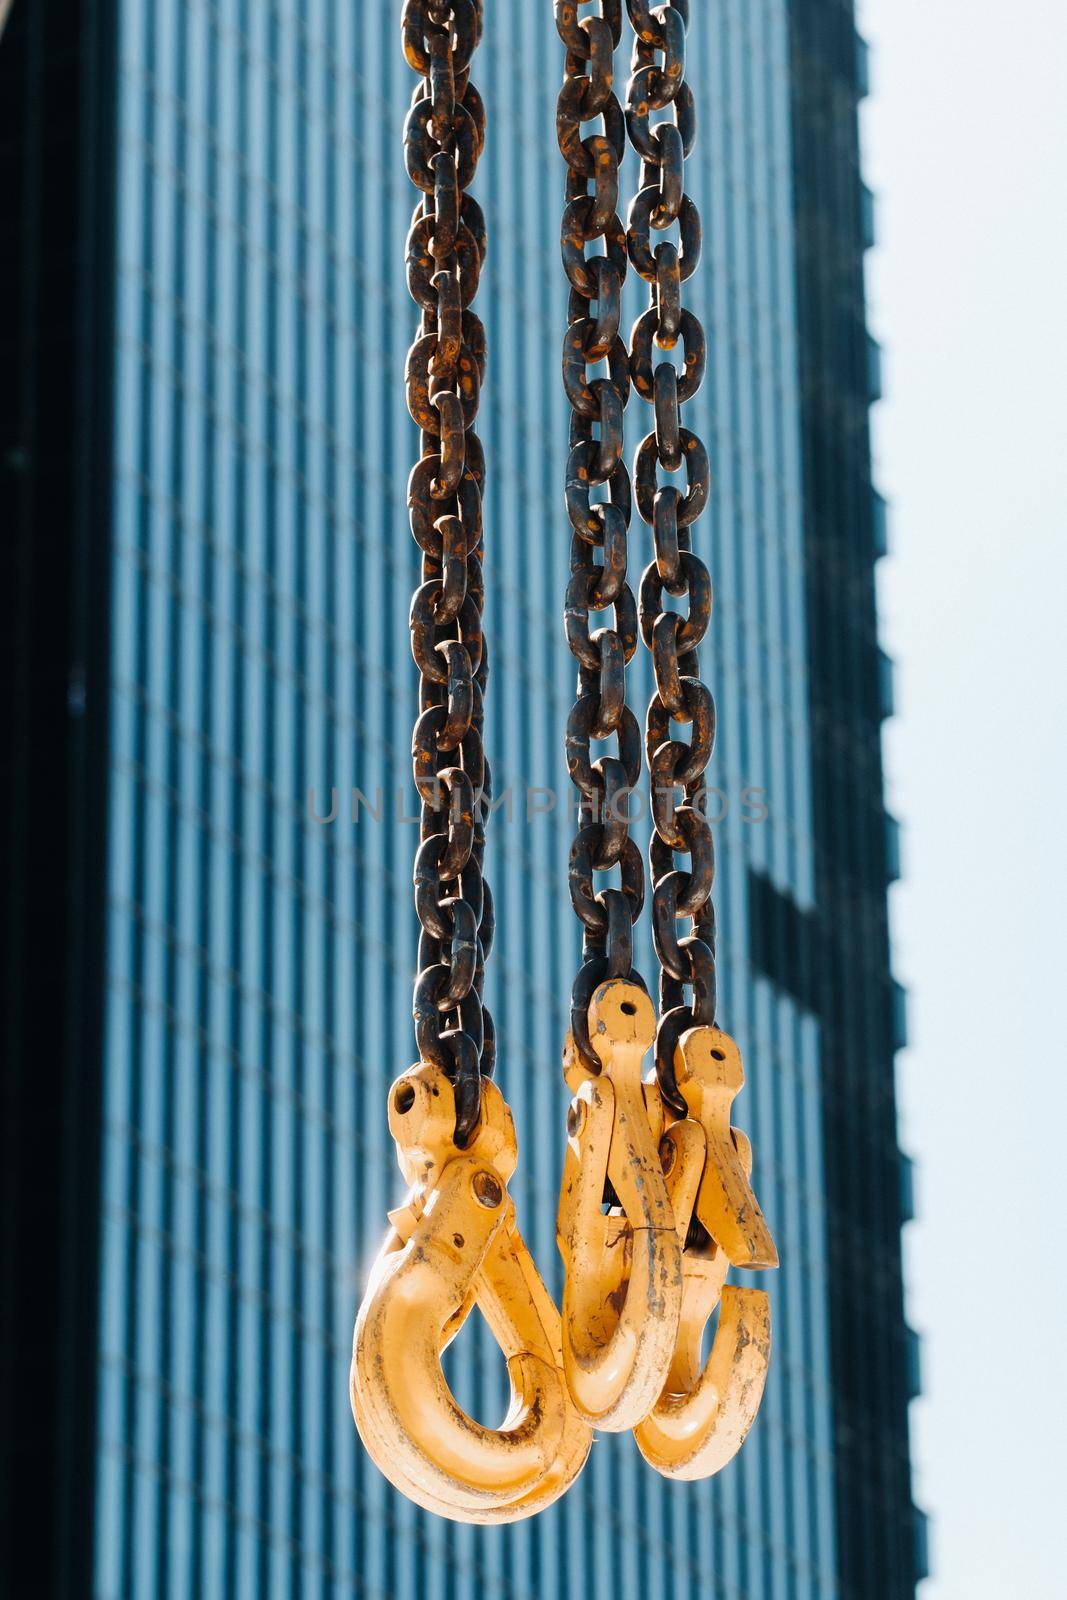 The hooks of the mobile crane near the glass of high buildings.Lots of hooks hanging from chains suspended from a crane.